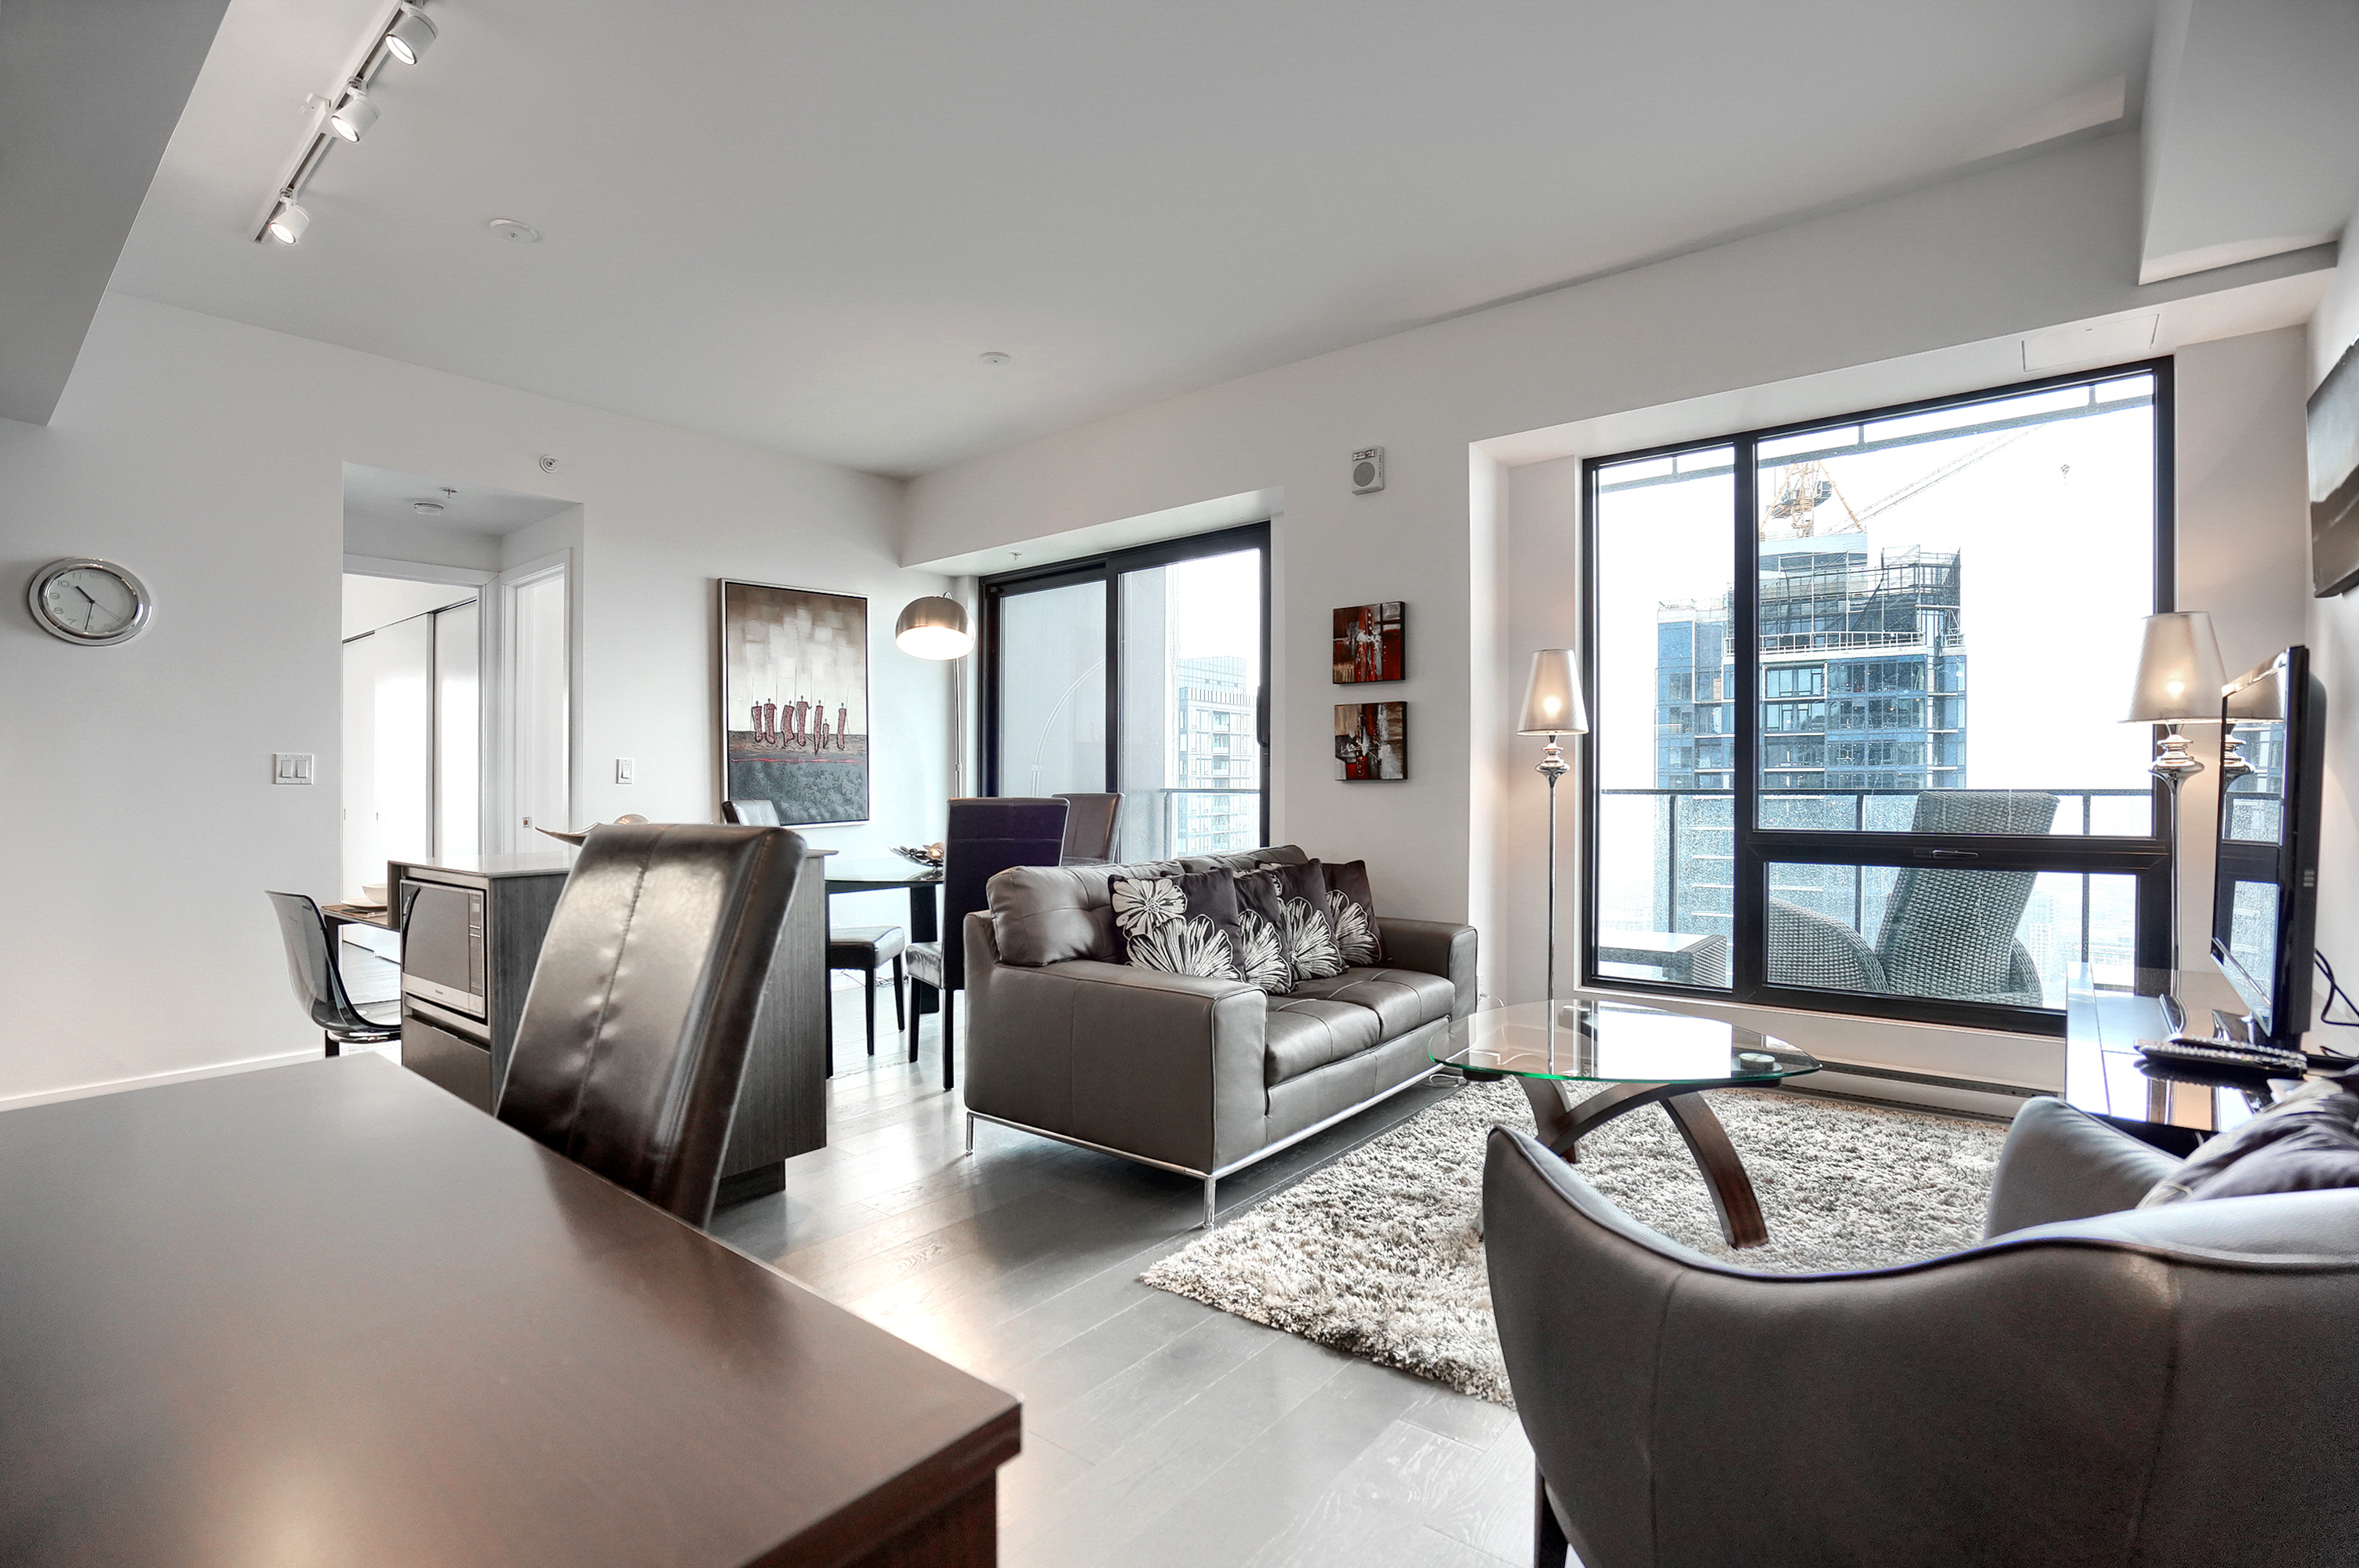 Spacious, bright, beautifully designed living area in this luxury furnished rental in montreal. Two large, floor-to-ceiling windows fills the room with sunlight. Plush leather furnishings, dining area for four, and a study desk and leather chair to match.